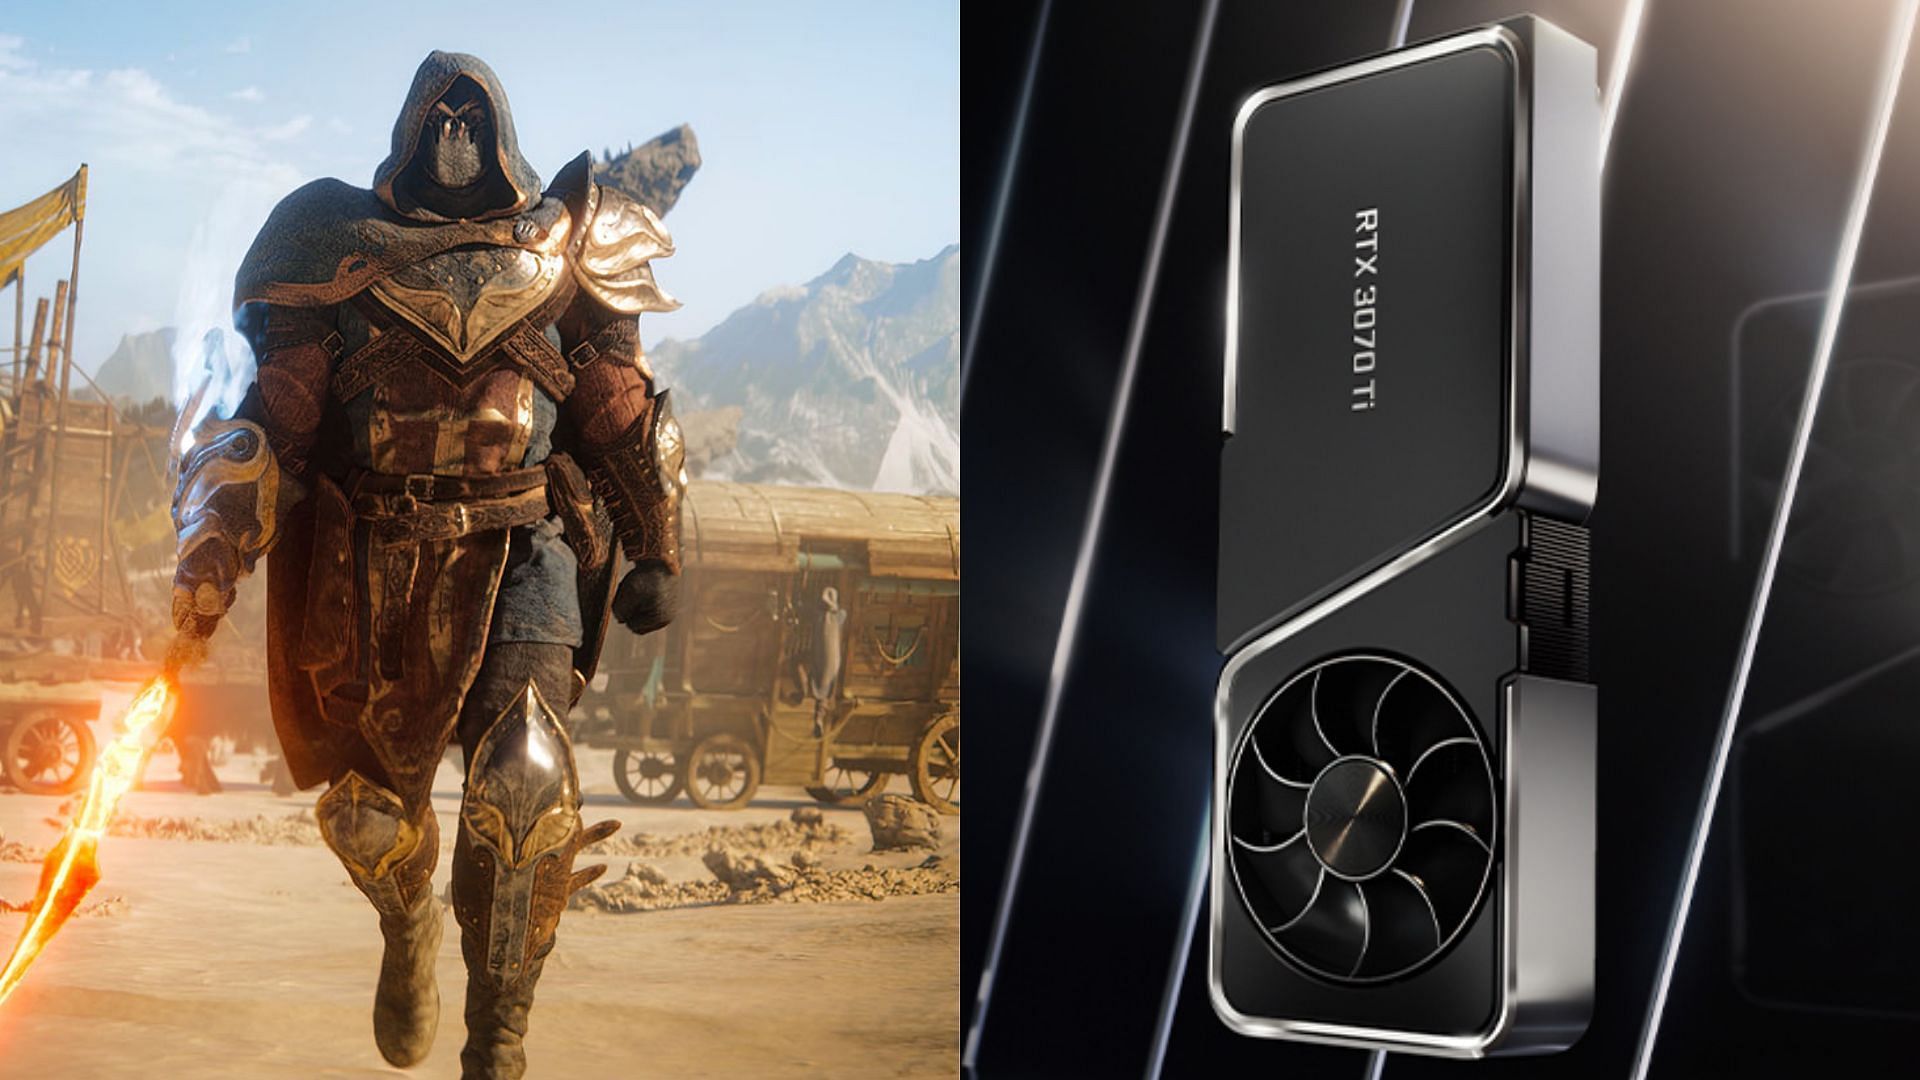 The RTX 3070 and 3070 Ti are solid video cards for playing Atlas Fallen (Image via Focus Entertaiment and Nvidia)